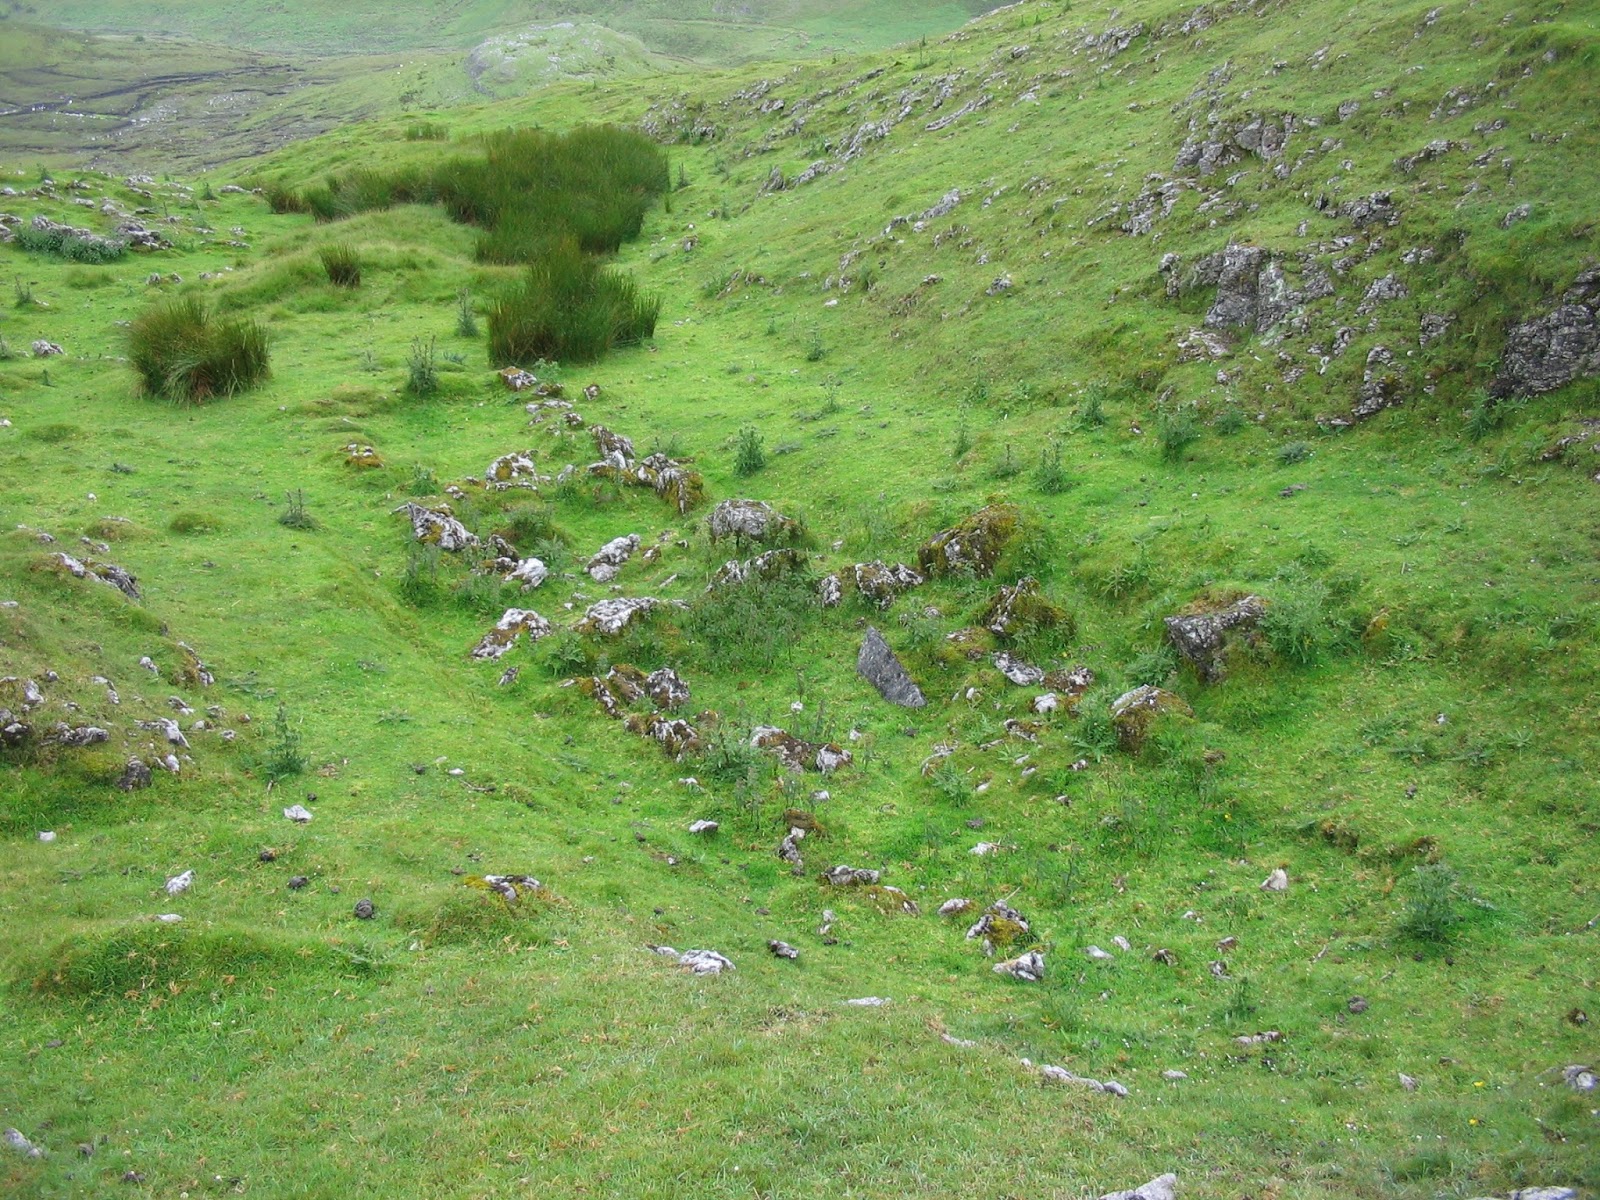 Turlough Hill from southwest. Insert shows summit with cairn clearly